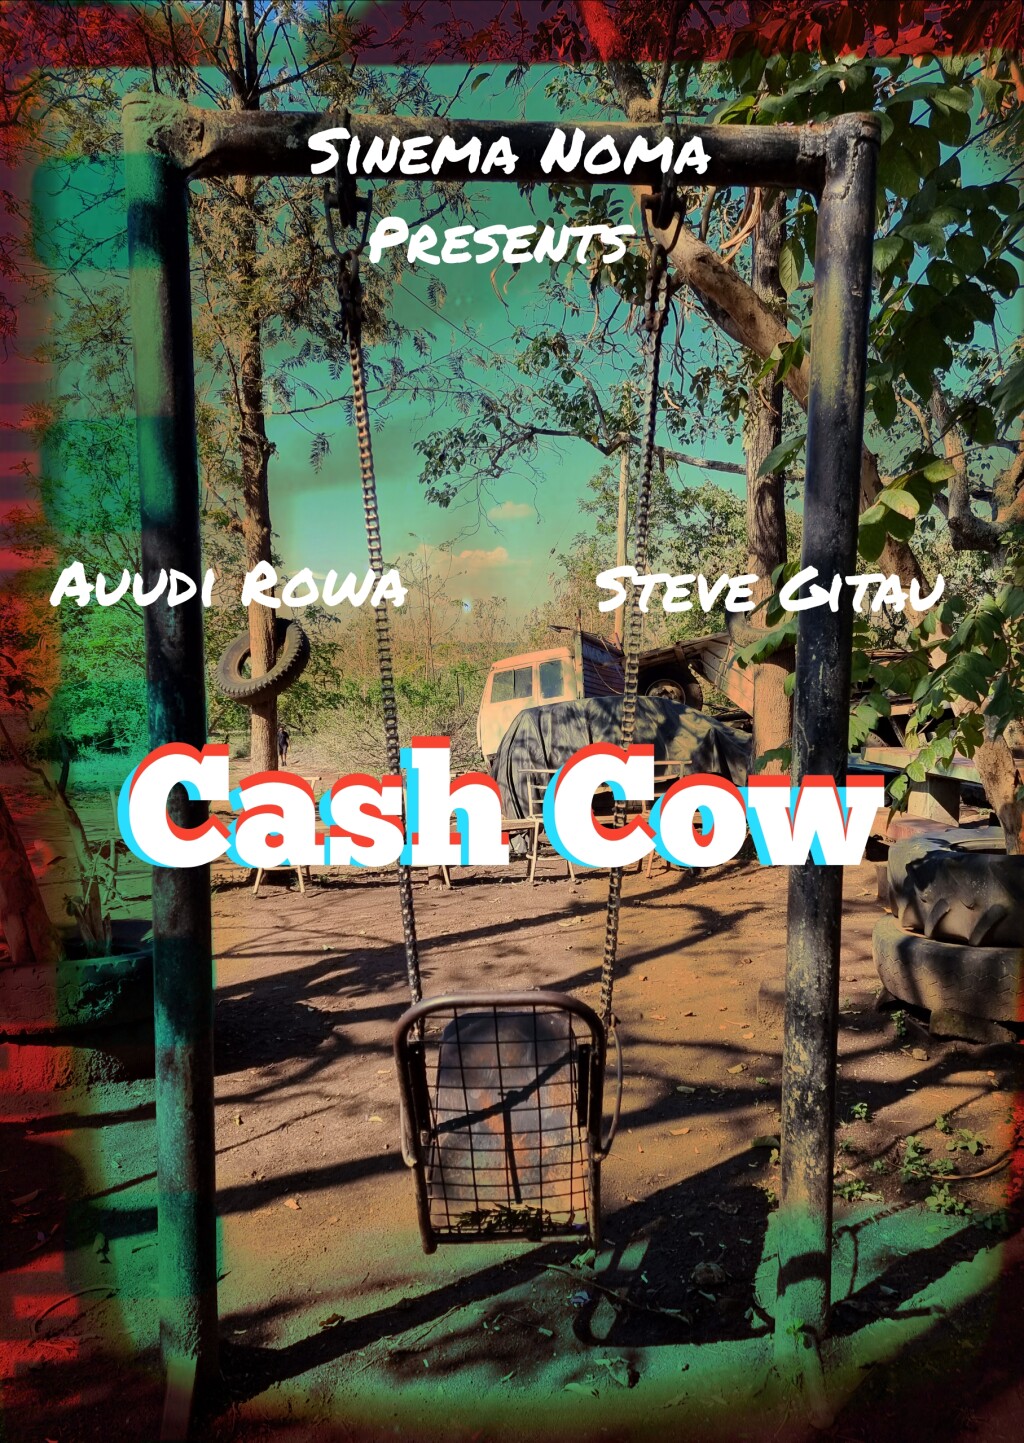 Filmposter for Cash Cow